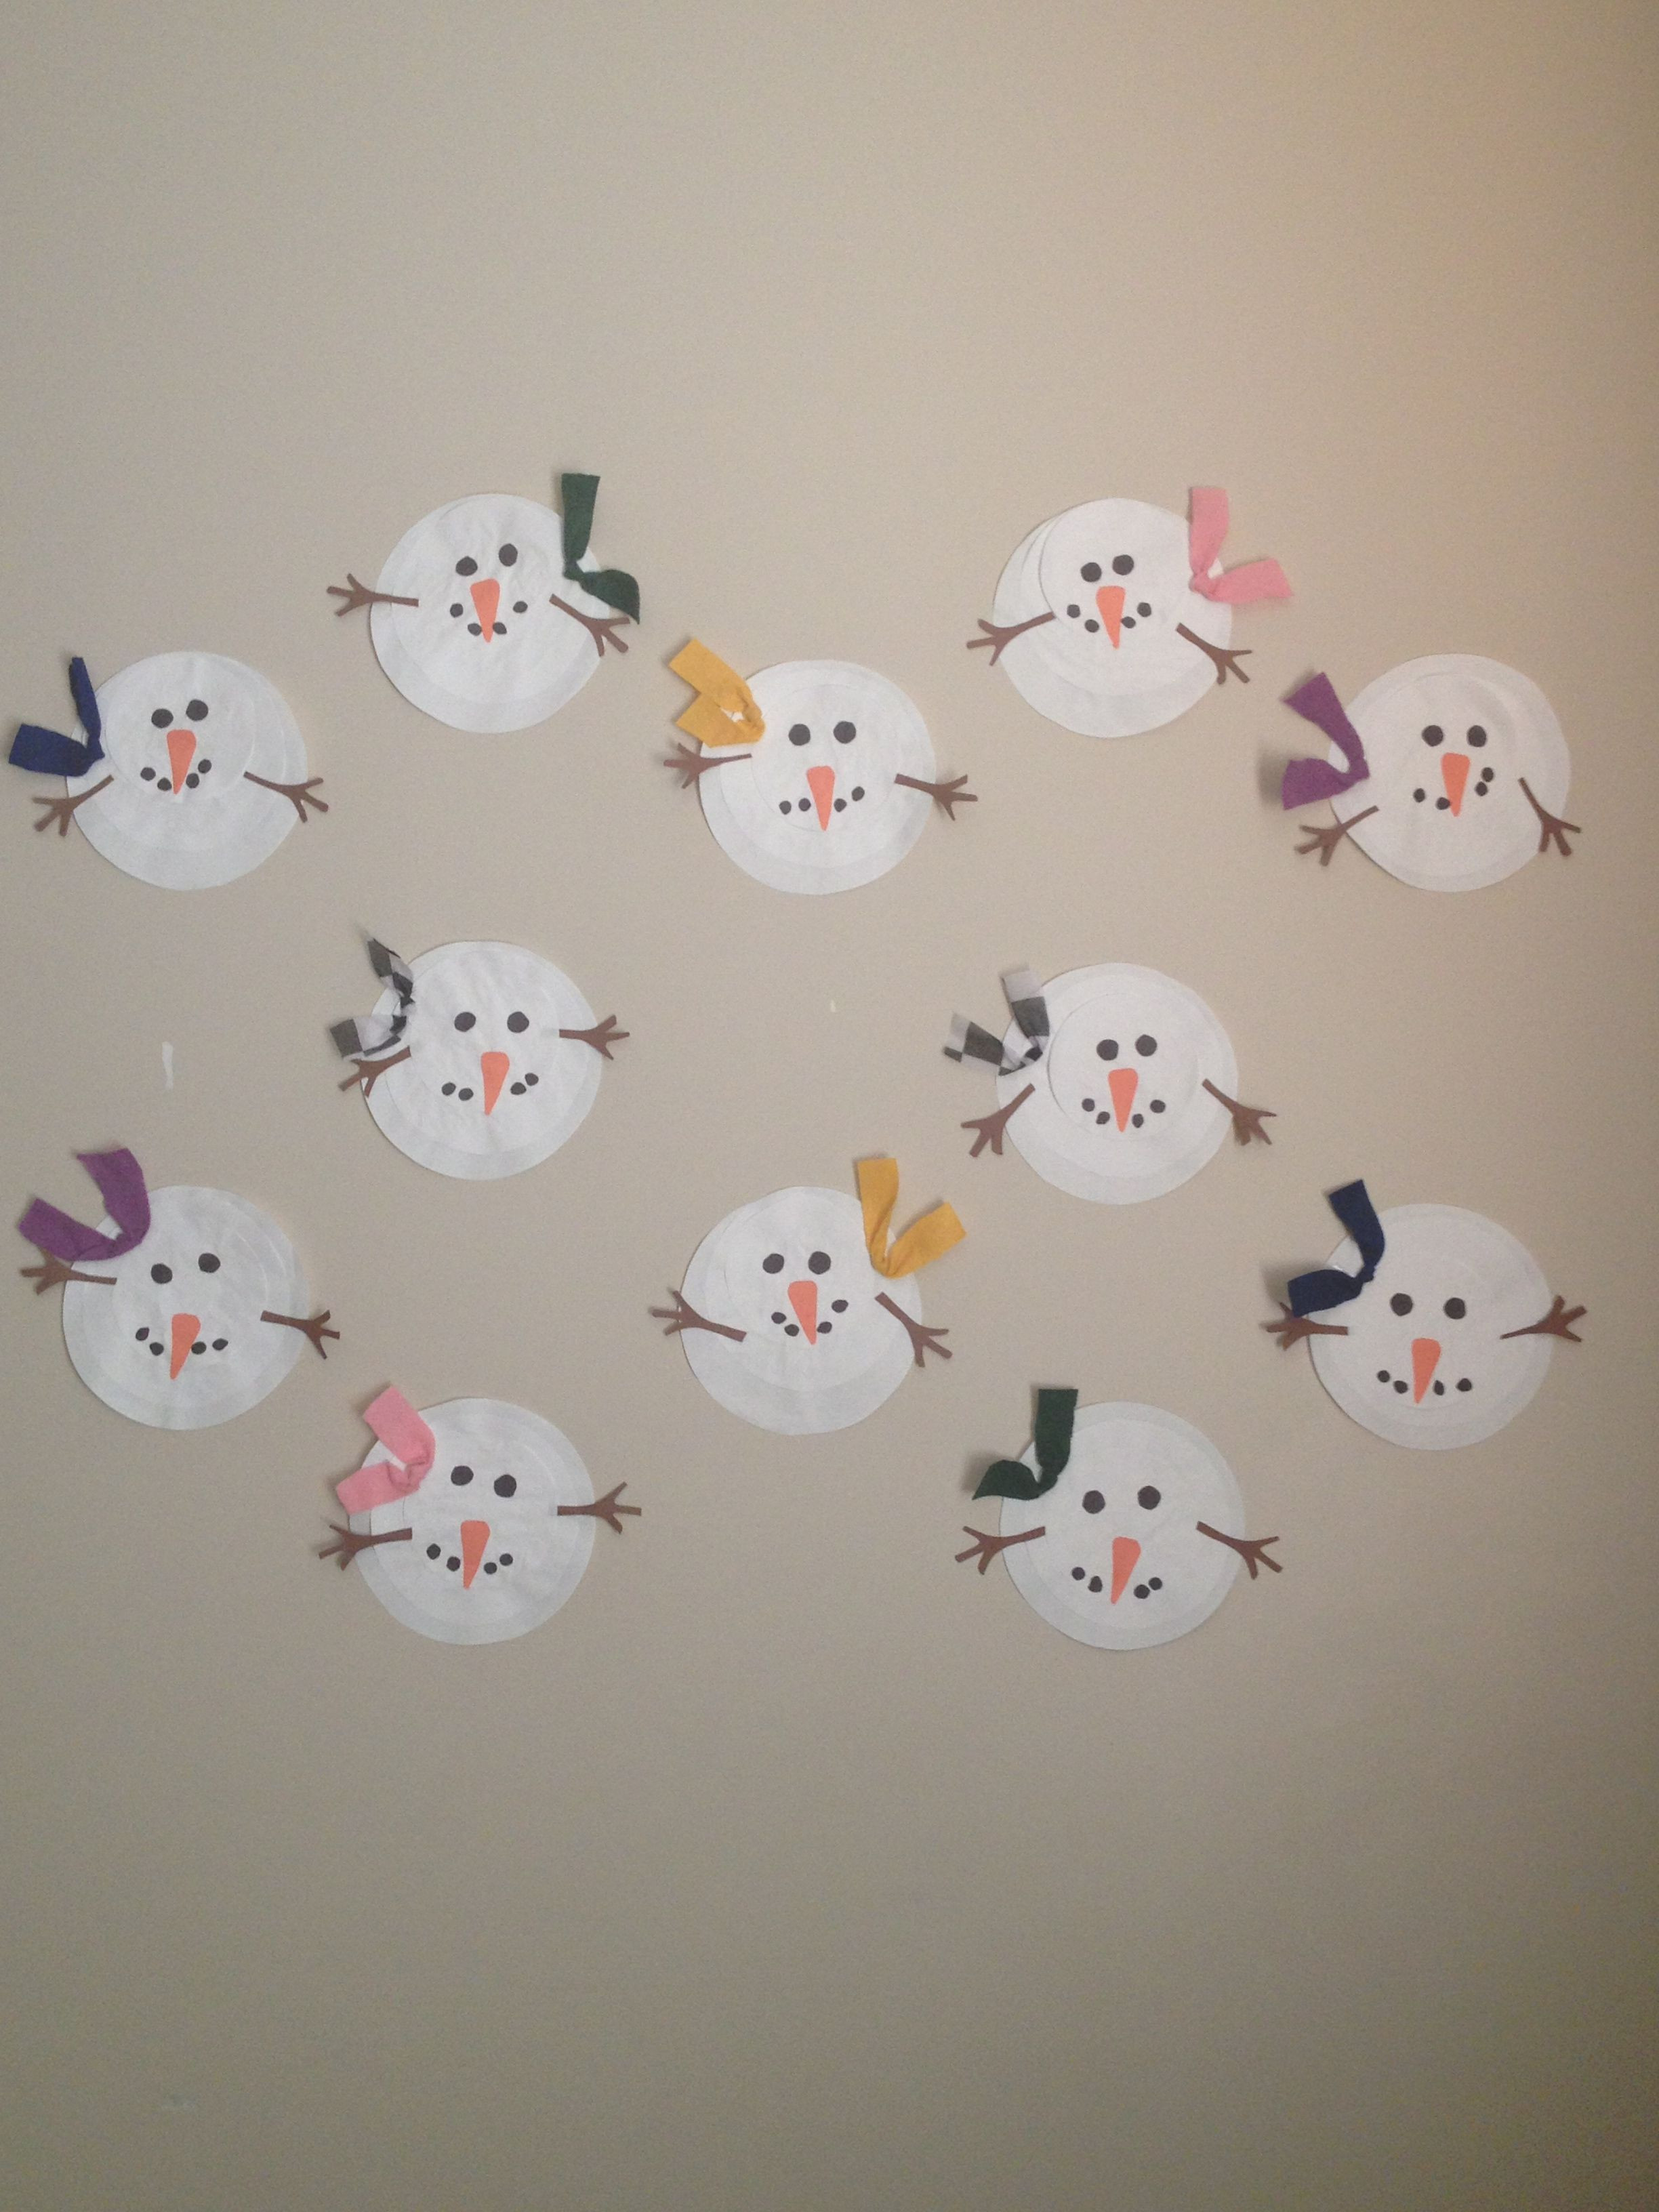 Toddler Craft Ideas 2 Year Old
 Snowman craft Did this craft with 2 year olds